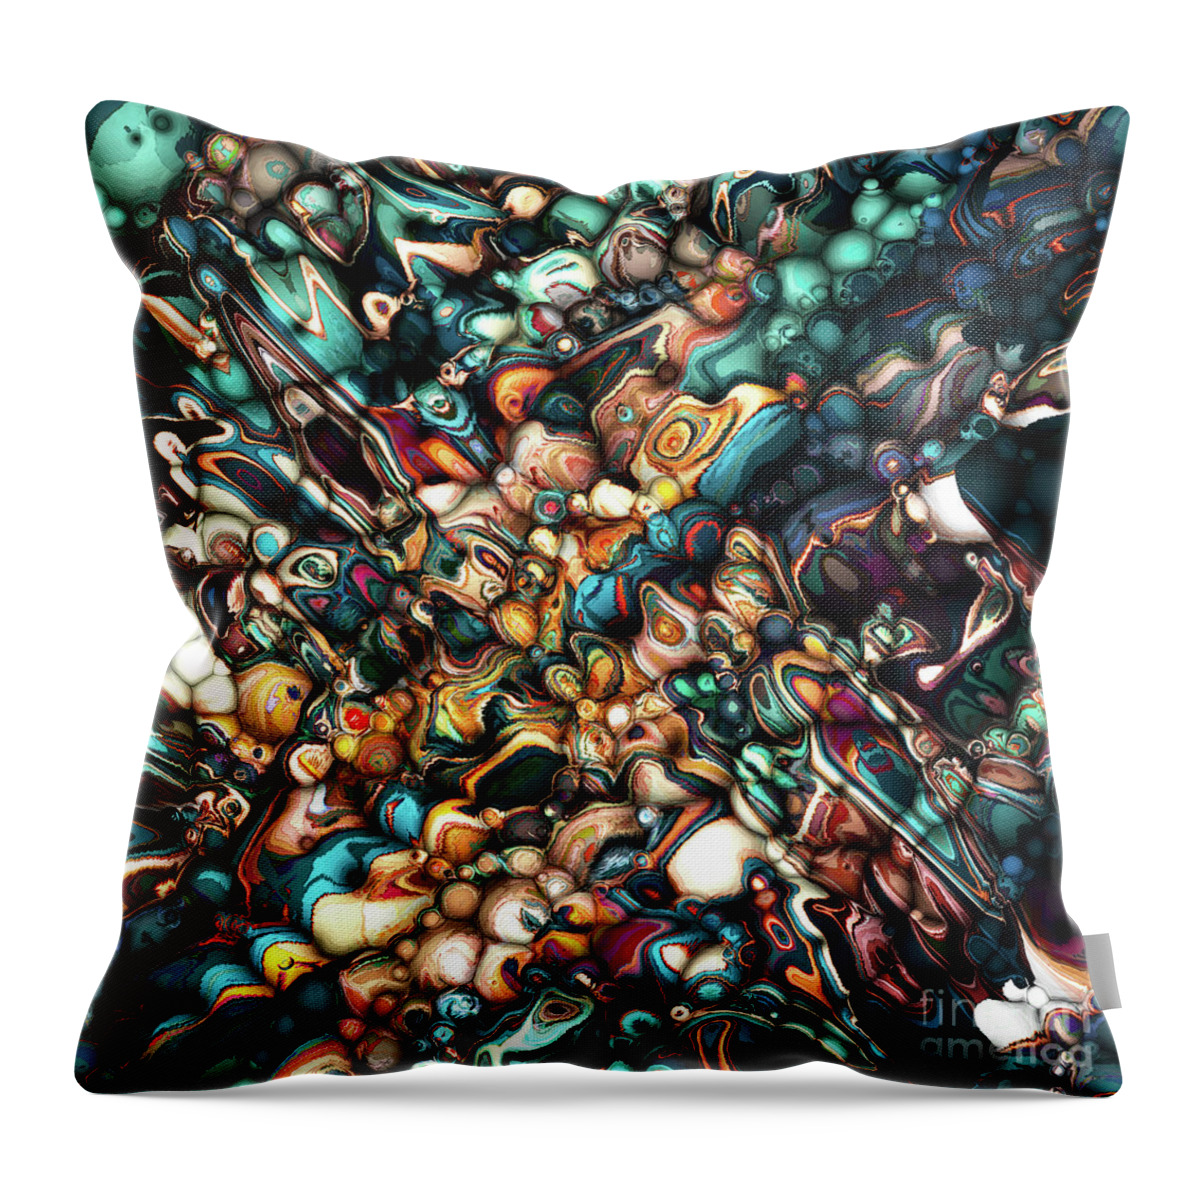 Abstract Throw Pillow featuring the digital art Abstract Texture And Colors by Phil Perkins